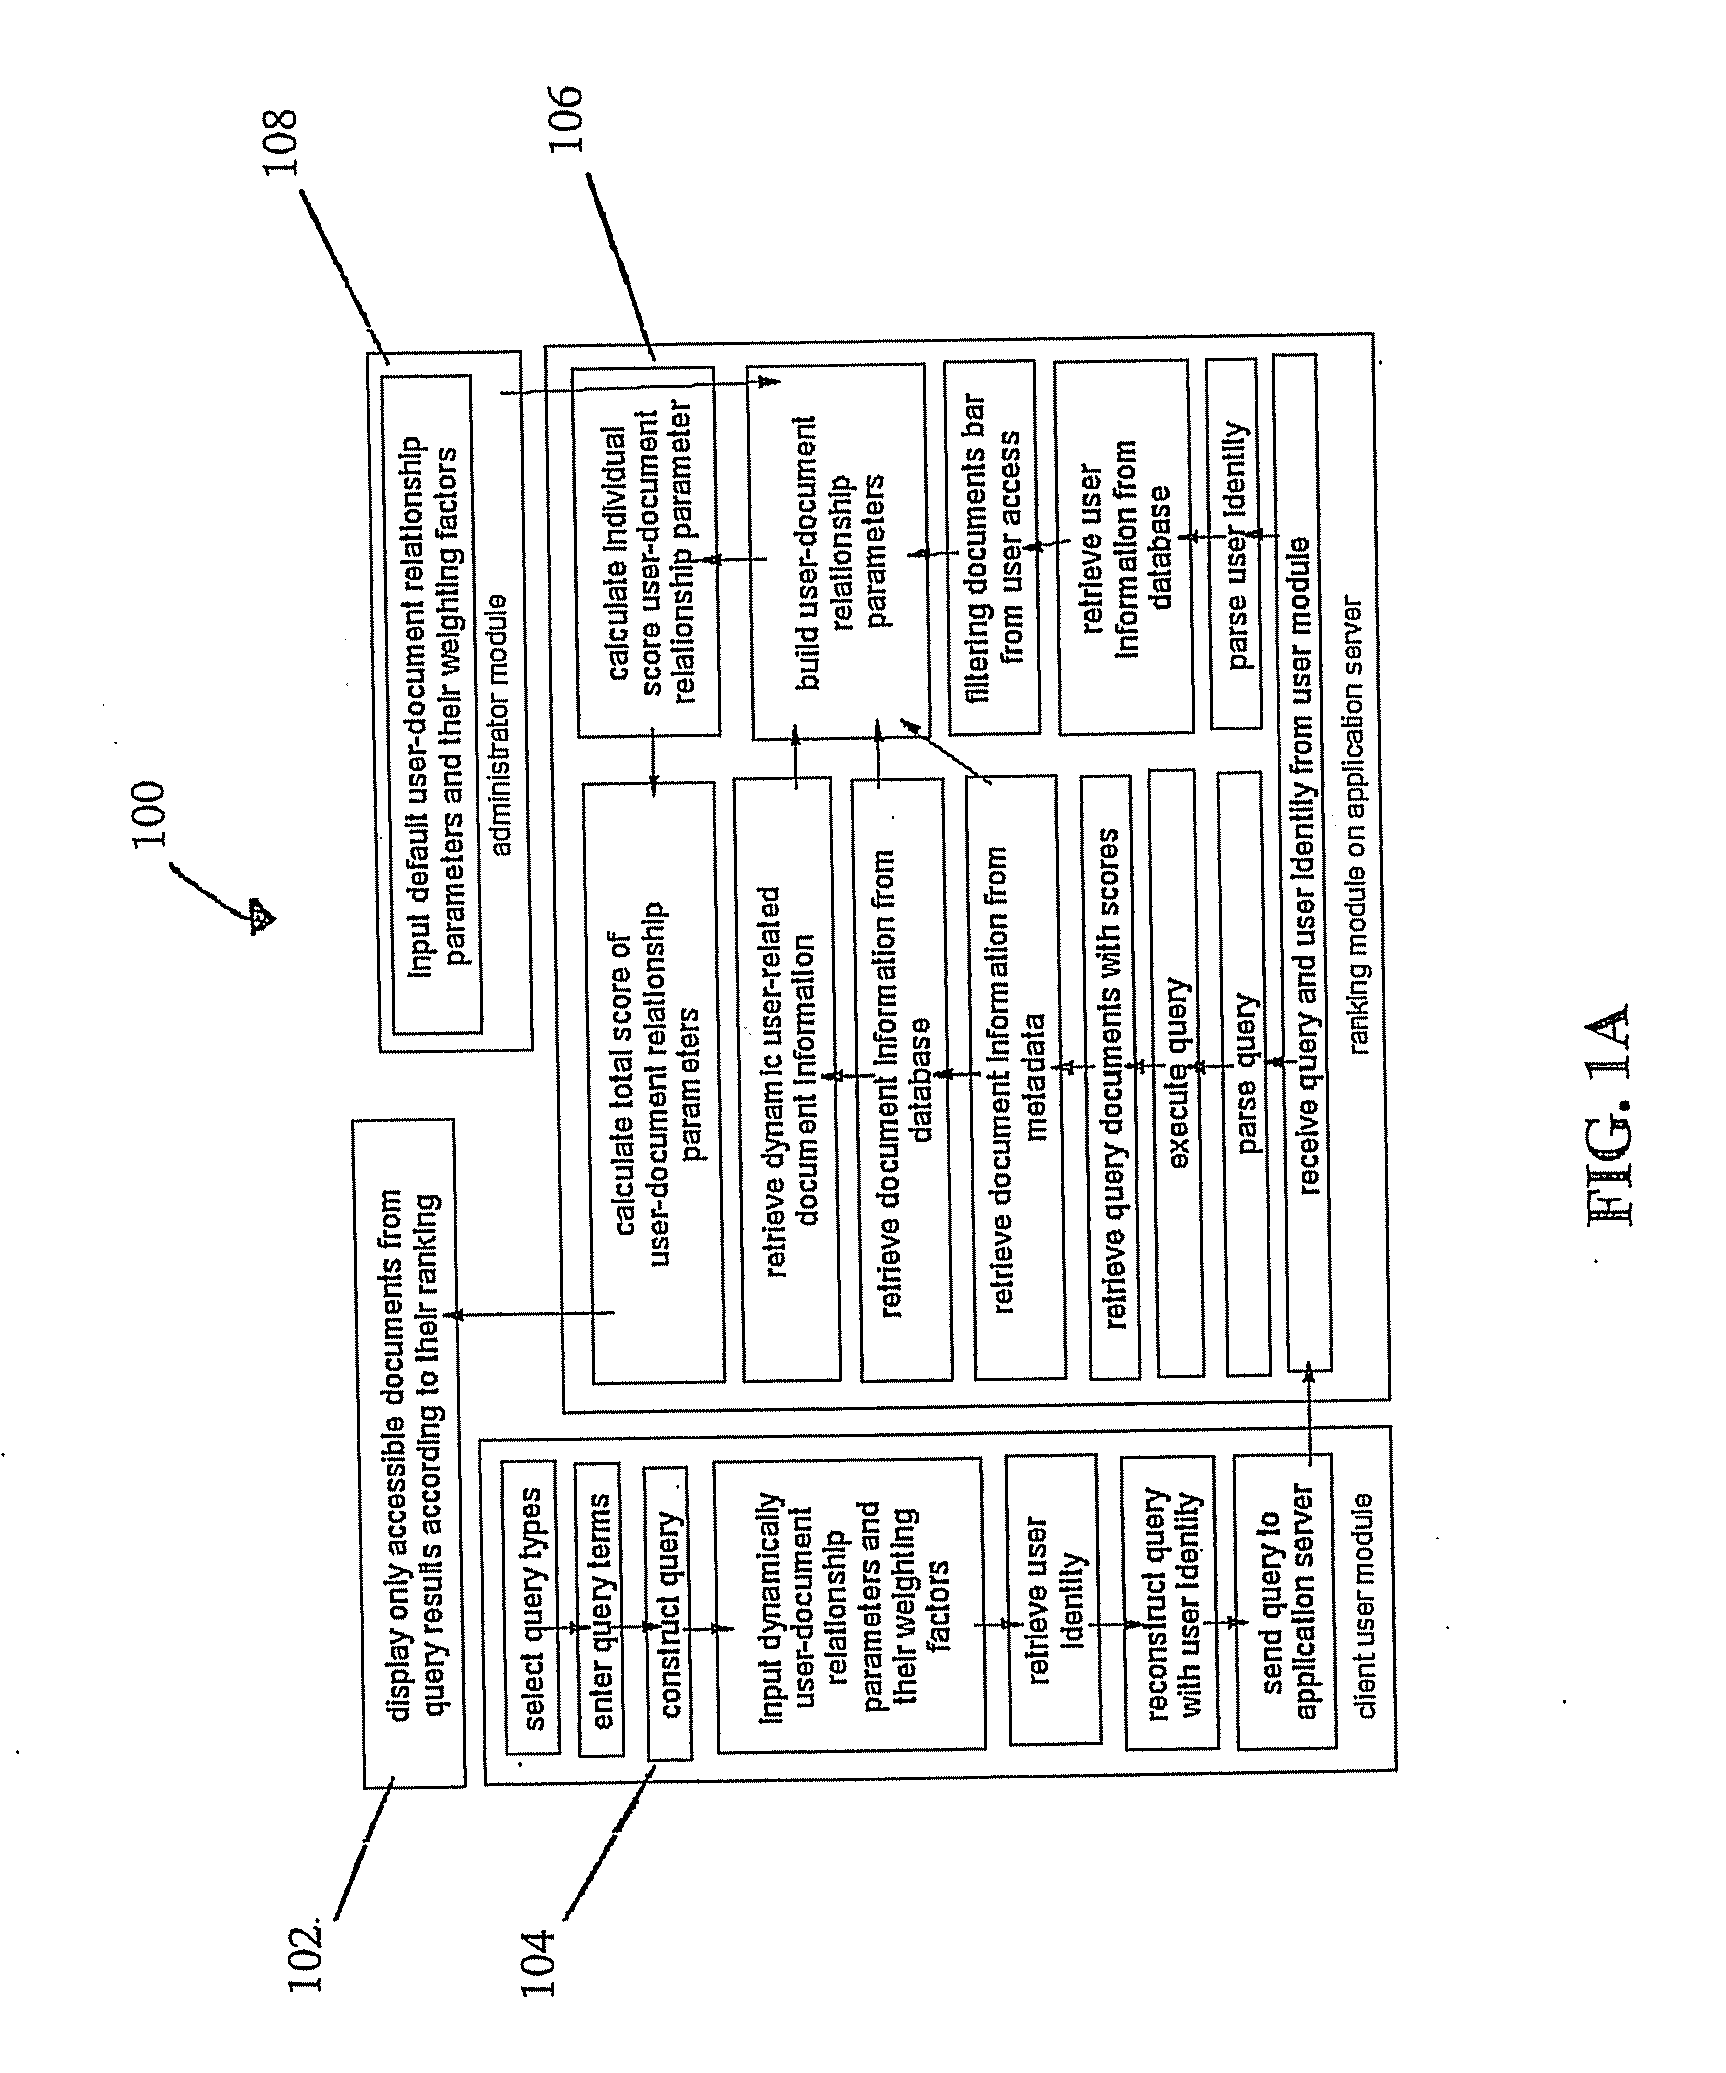 Method for a networked knowledge based document retrieval and ranking utilizing extracted document metadata and content